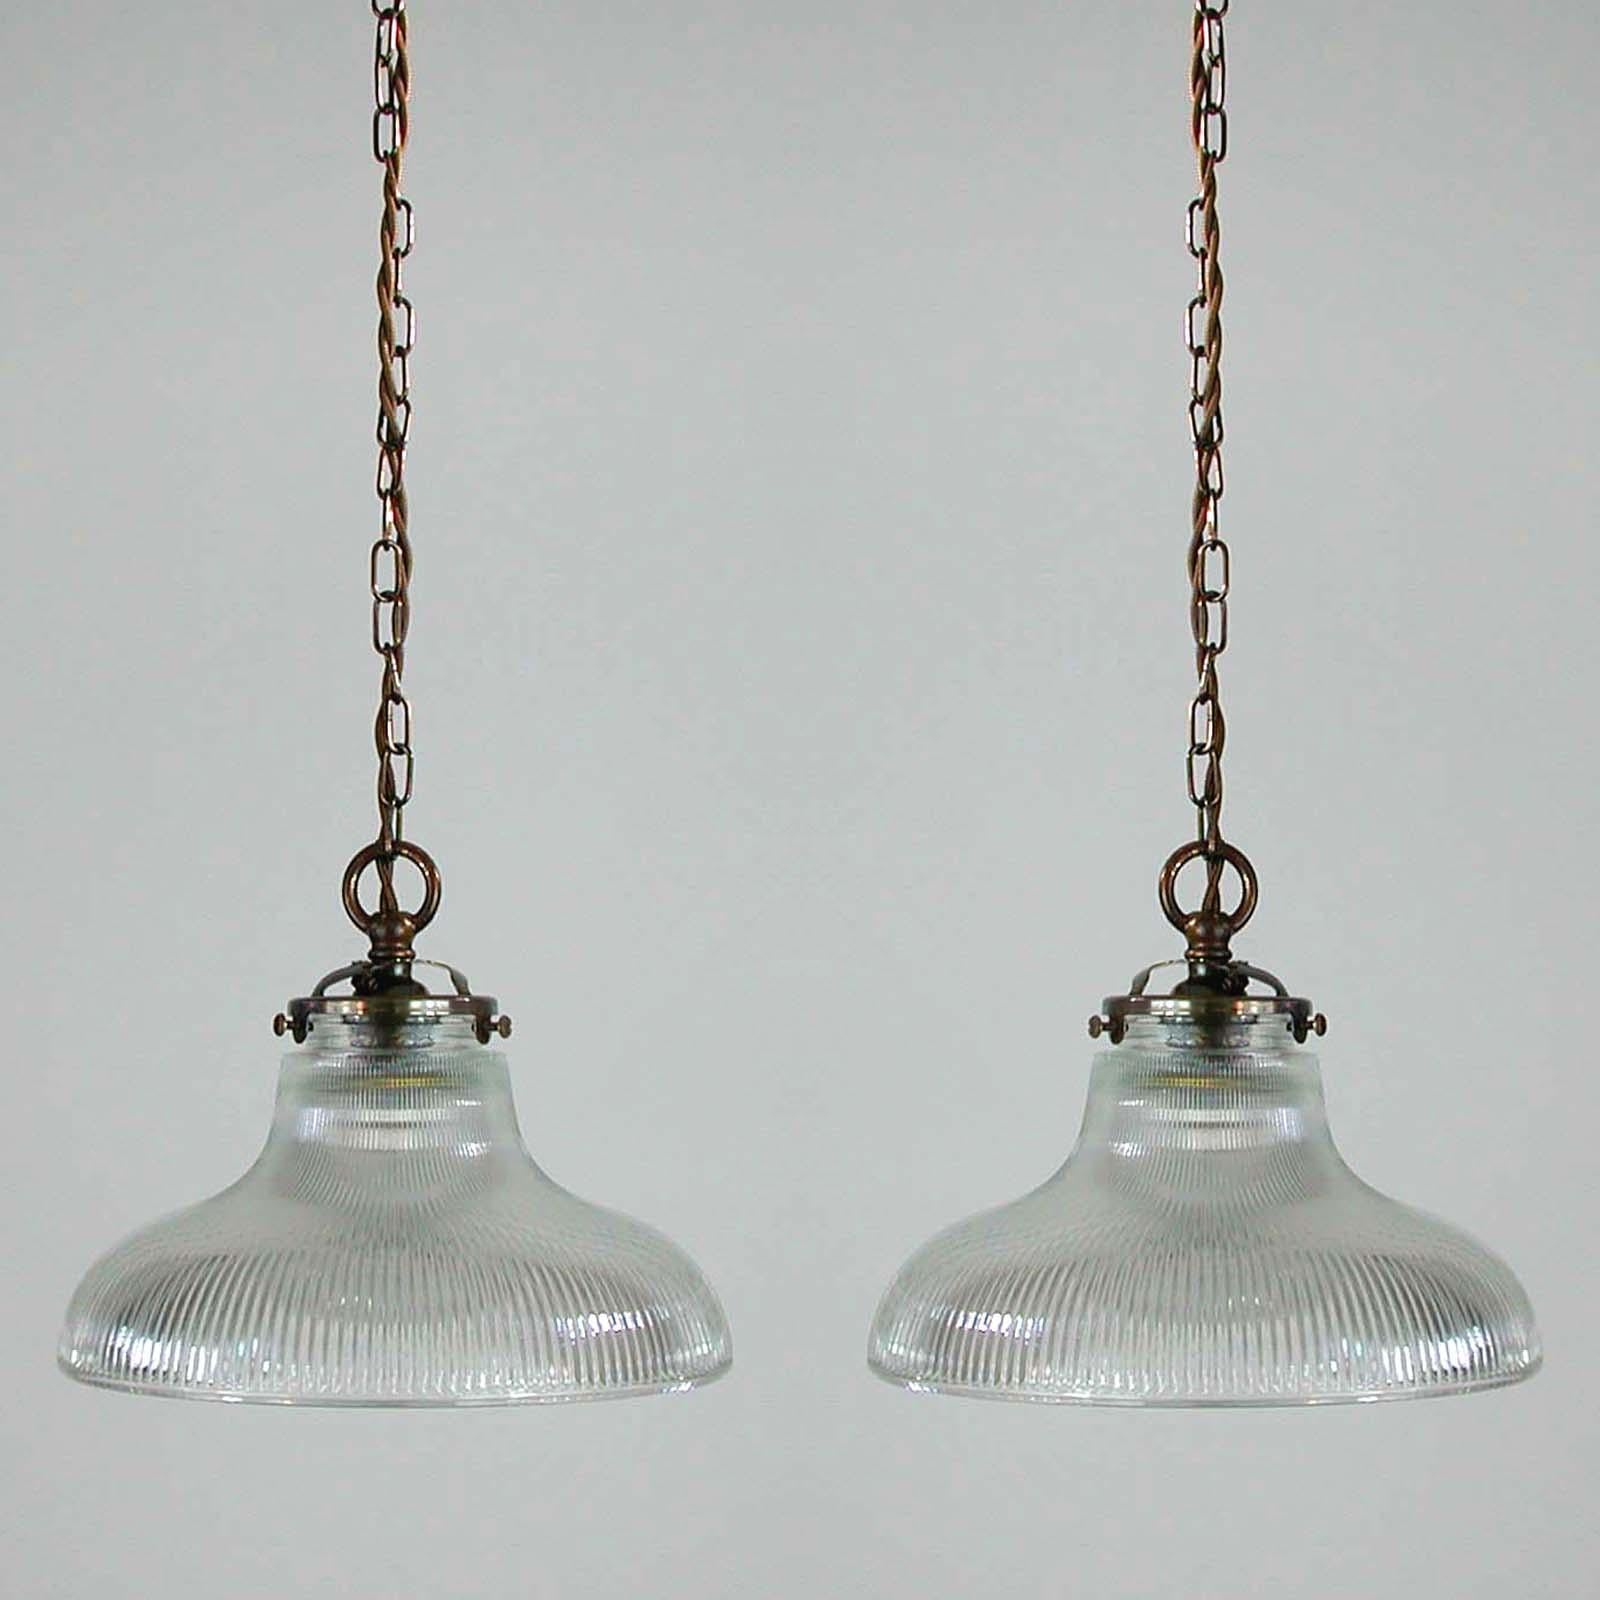 Mid-20th Century Midcentury French Holophane Industrial Glass Pendant Lamps, 1950s, Set of Two